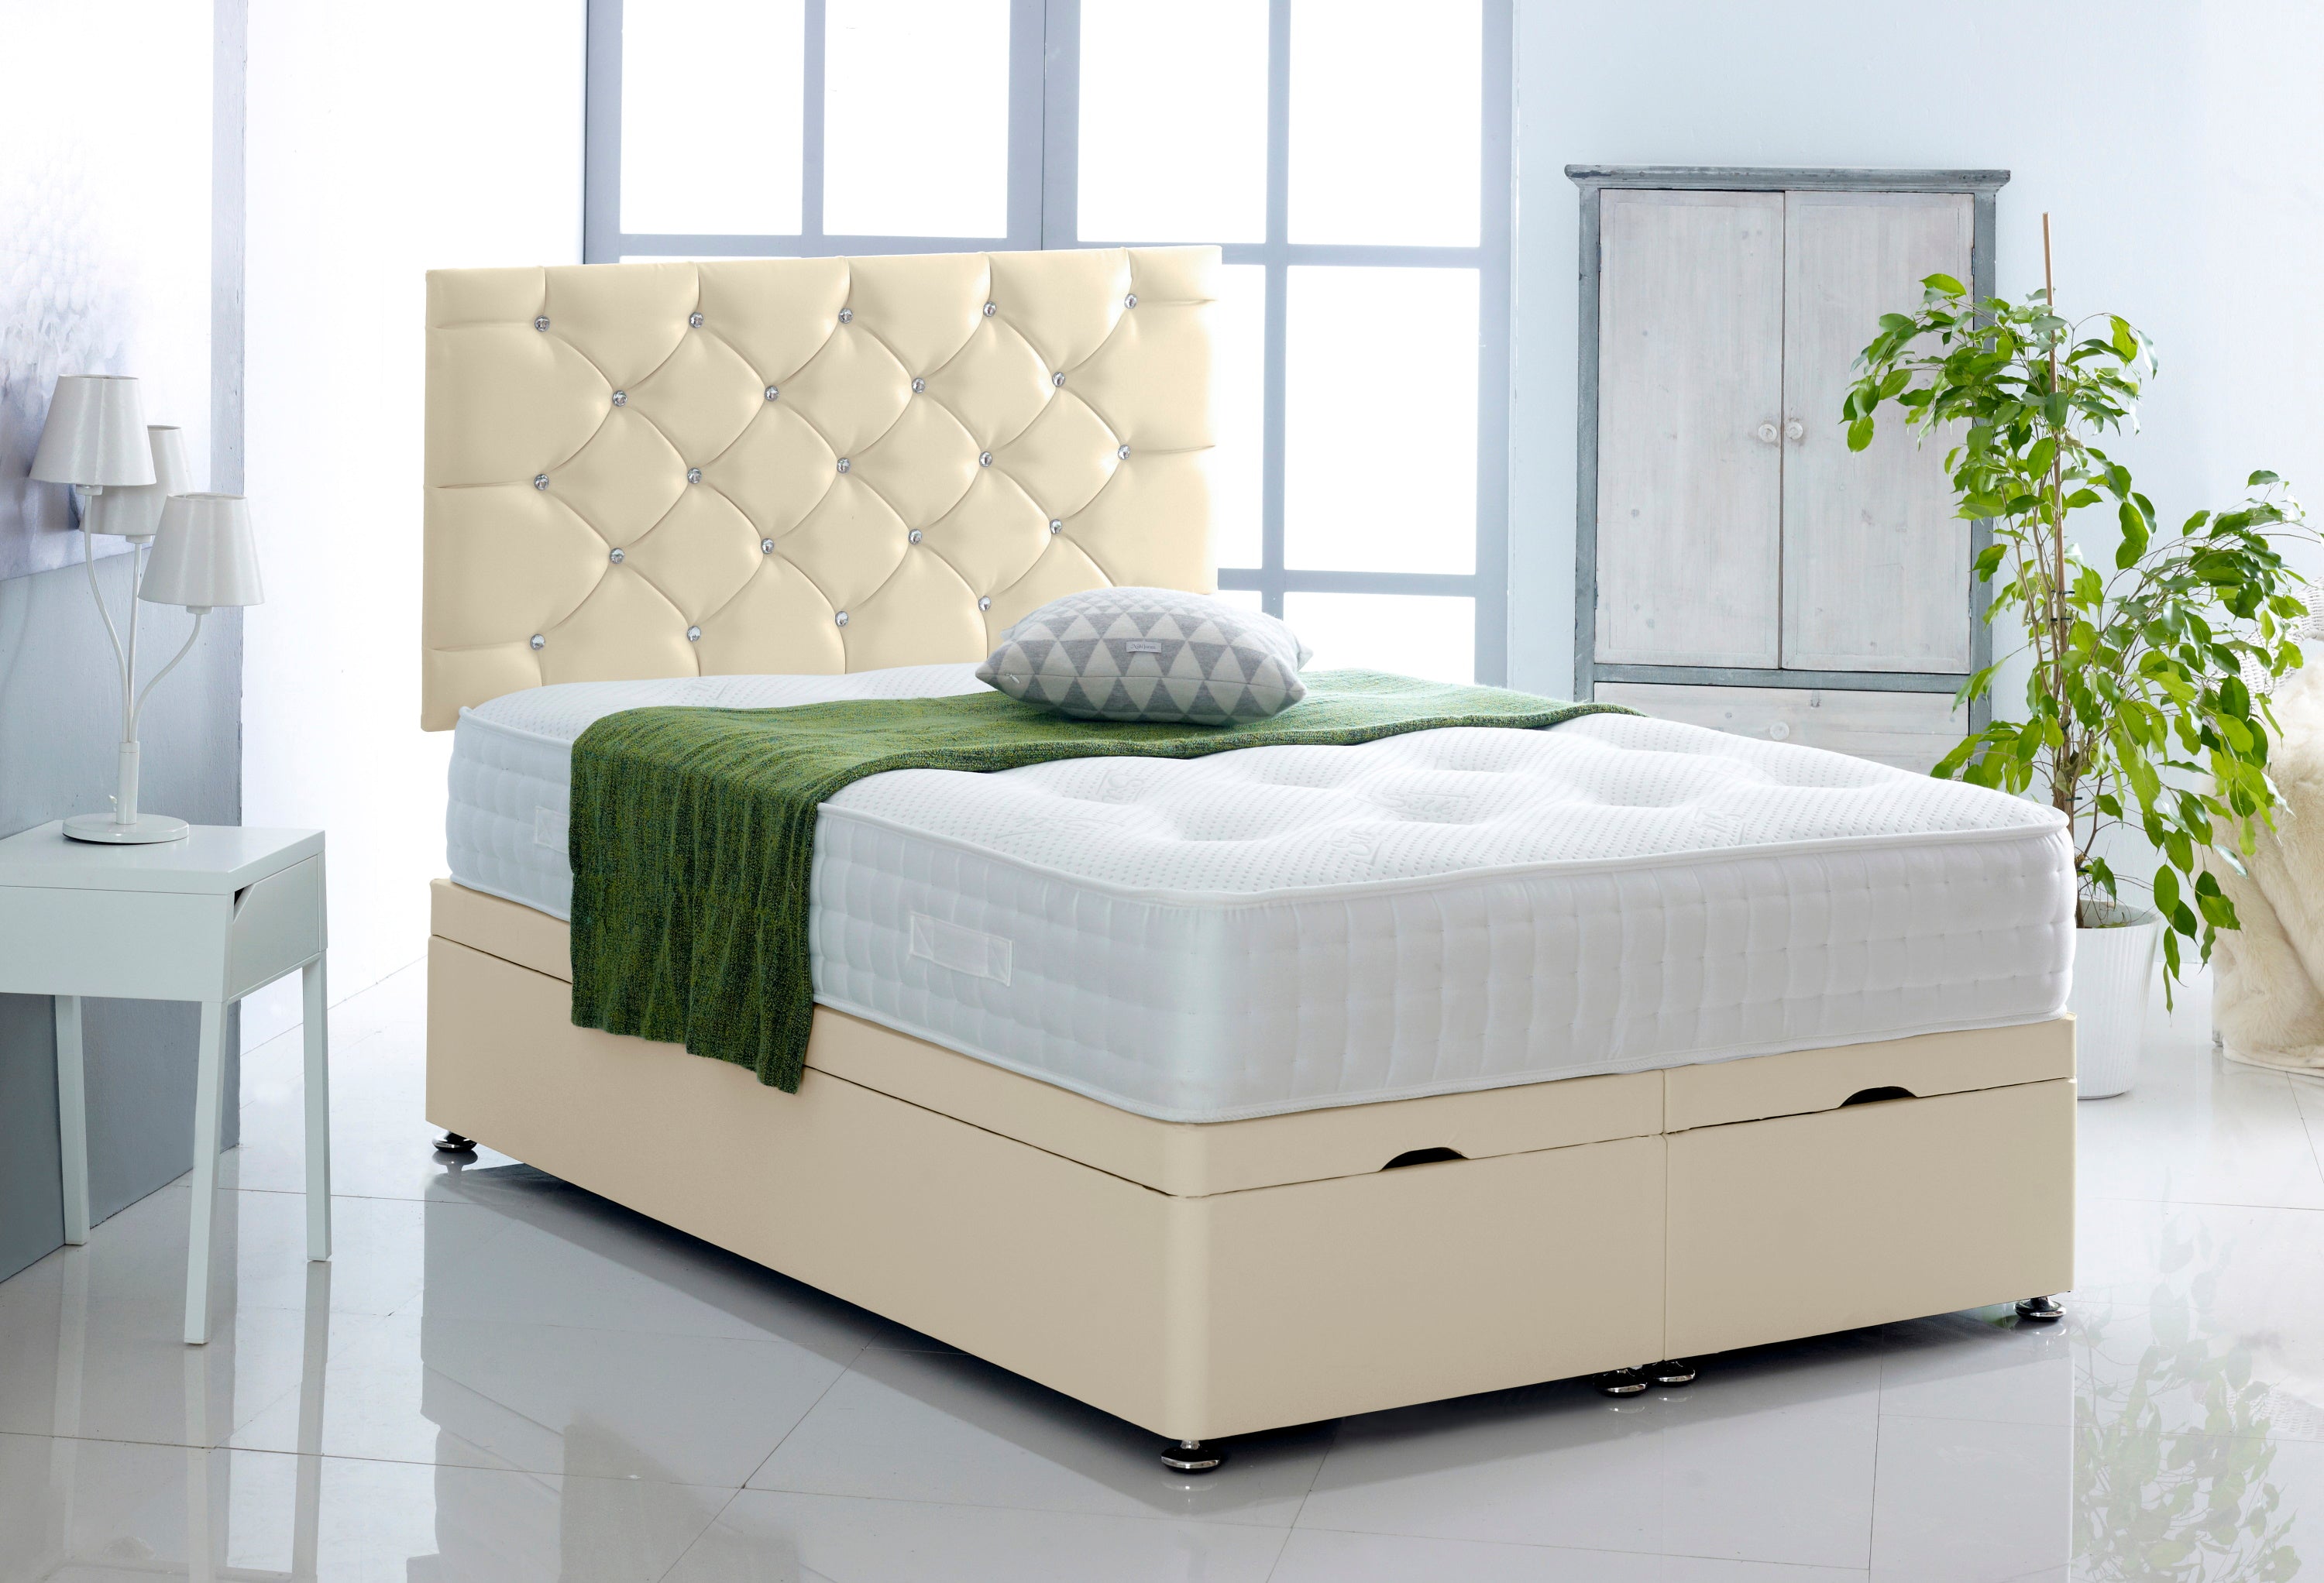 Faux Leather Ottoman Storage Divan Bed With Chesterfield Headboard